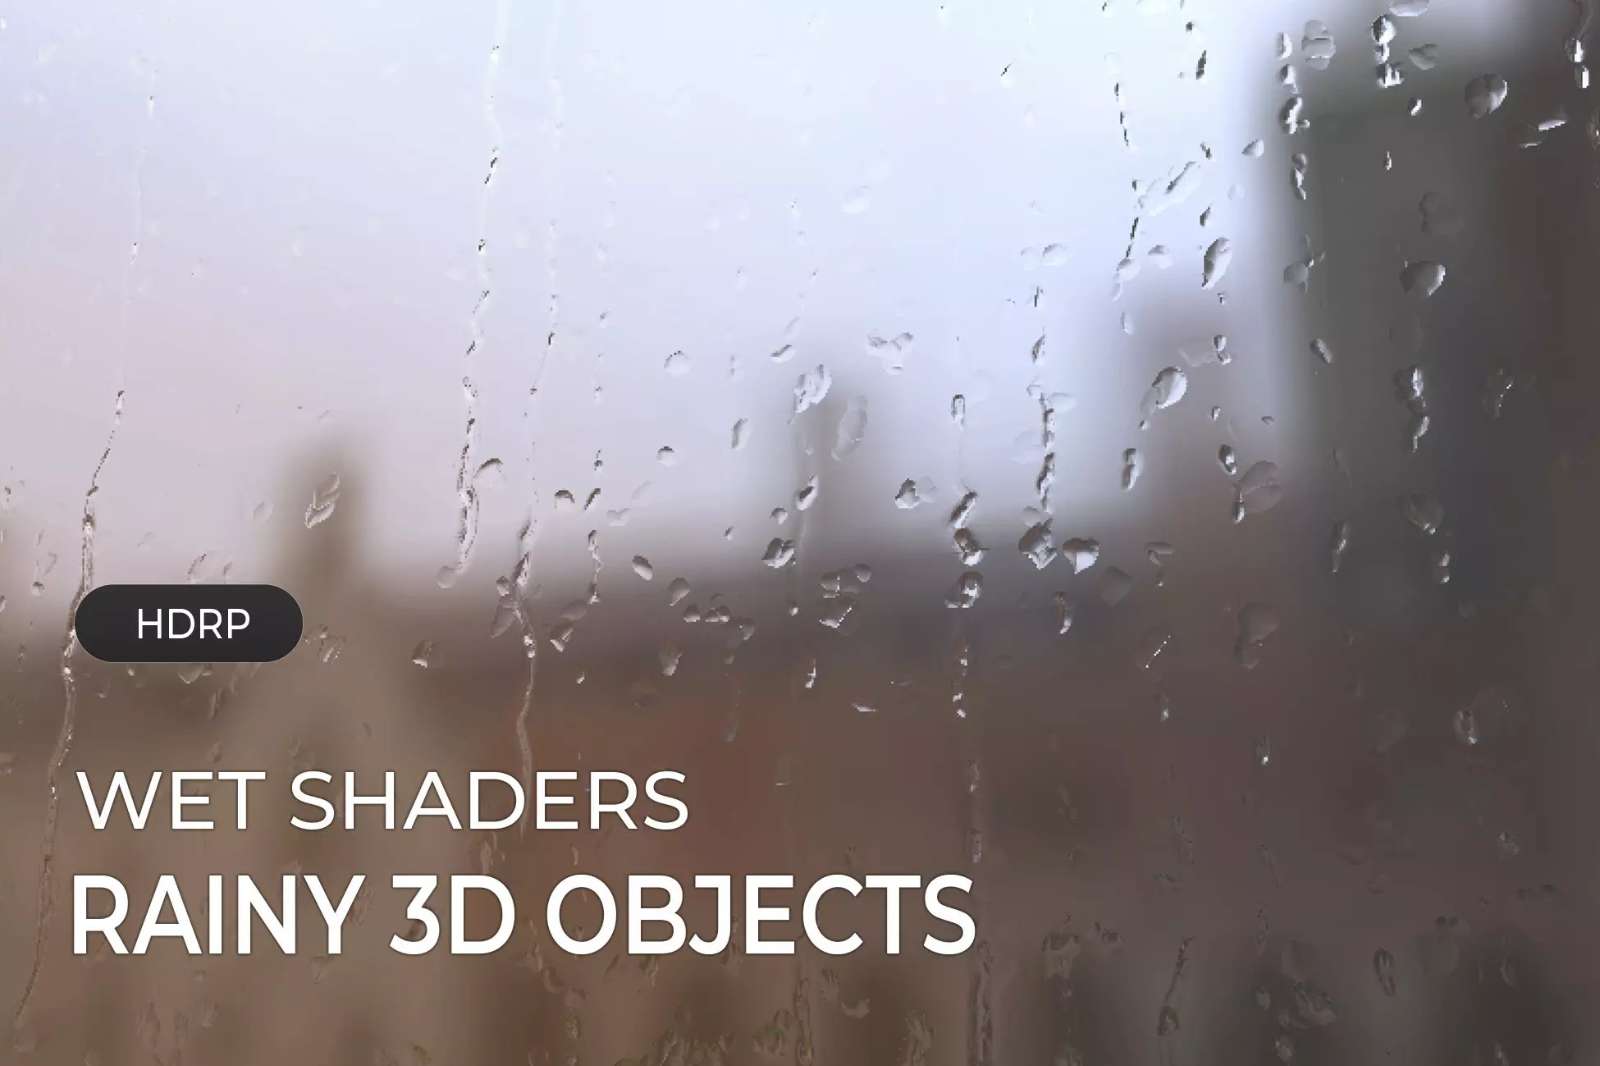 HDRP - Wet Shaders  Rainy 3D Objects 2020.1雨滴生成